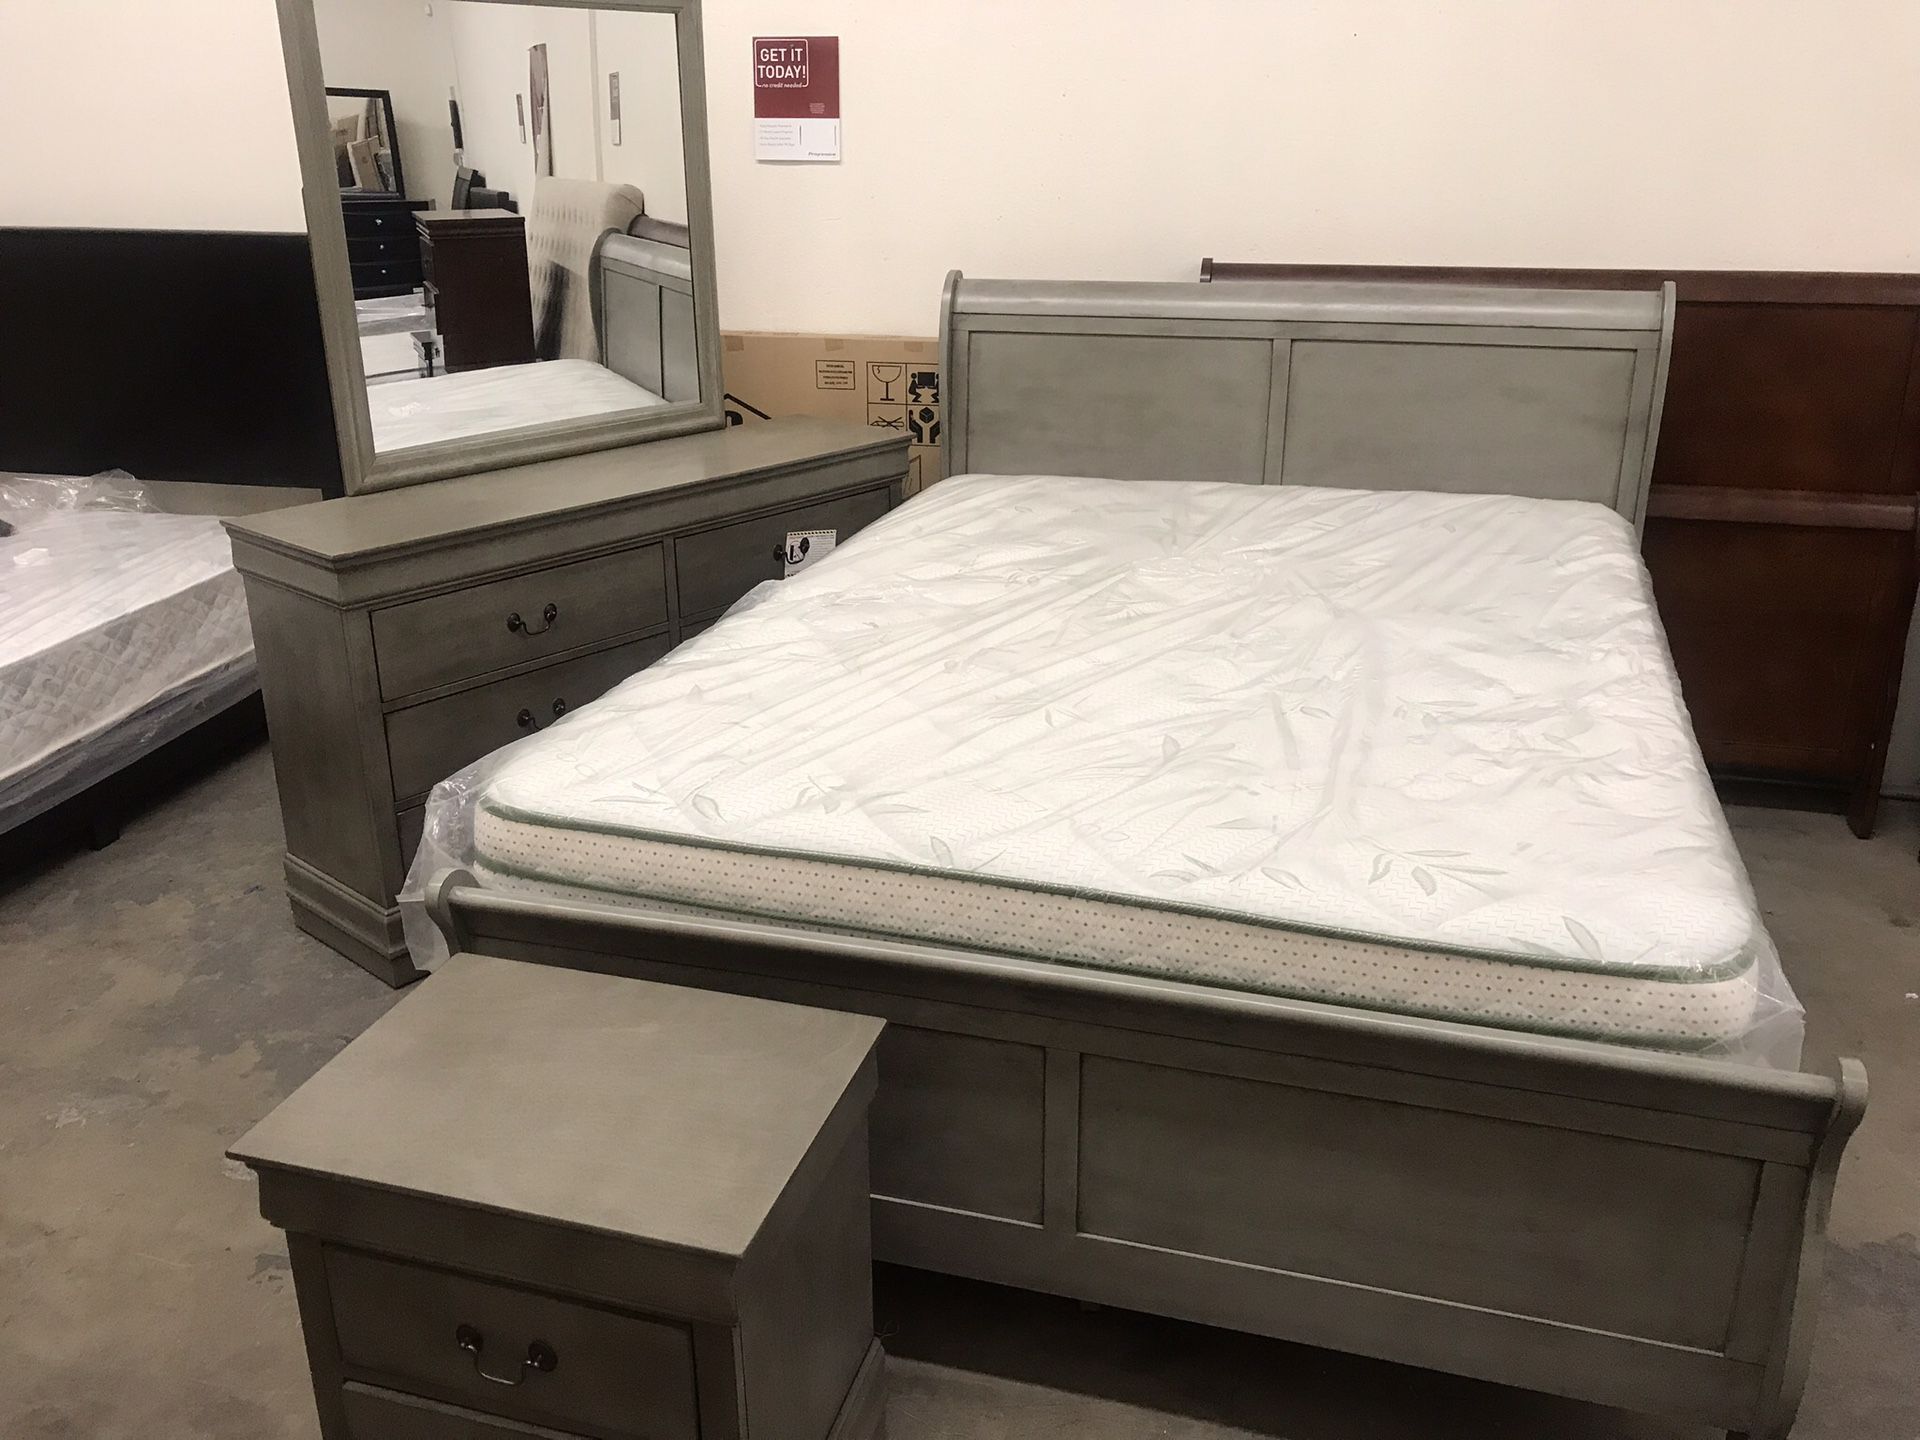 New grey 4pc bedroom set $500 Bed dresser mirror and Nightstand all New sealed was $999